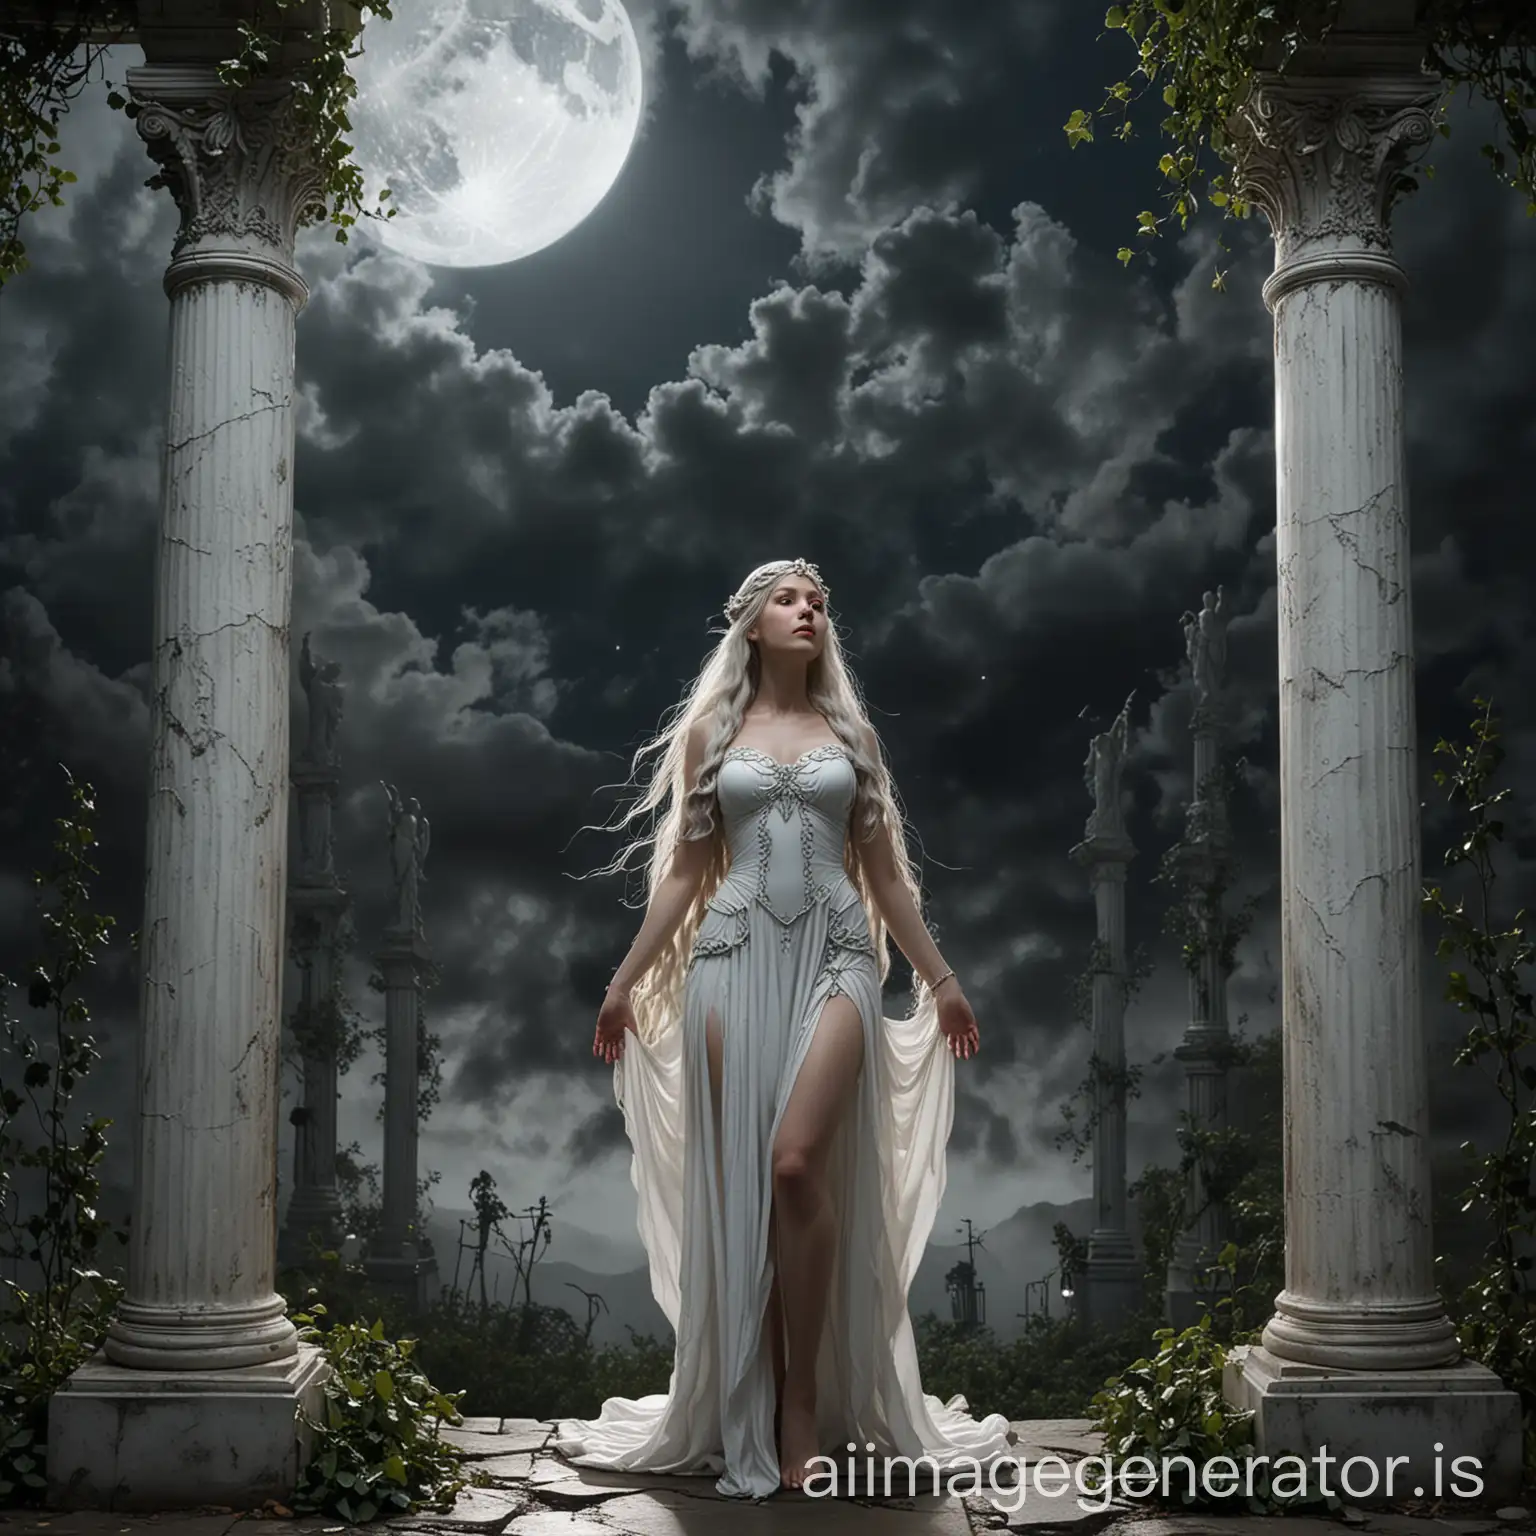 woman body, Galadriel in deep shadow, standing under bright crescent moon, old marble columns on both sides, ivy, fading body, vanishing body, short transparent skirt, tiara, long braids, stars, clouds in the dark sky, very long white hair, fog, steam, marble statues backed to them, montains and vegetation in background, close view